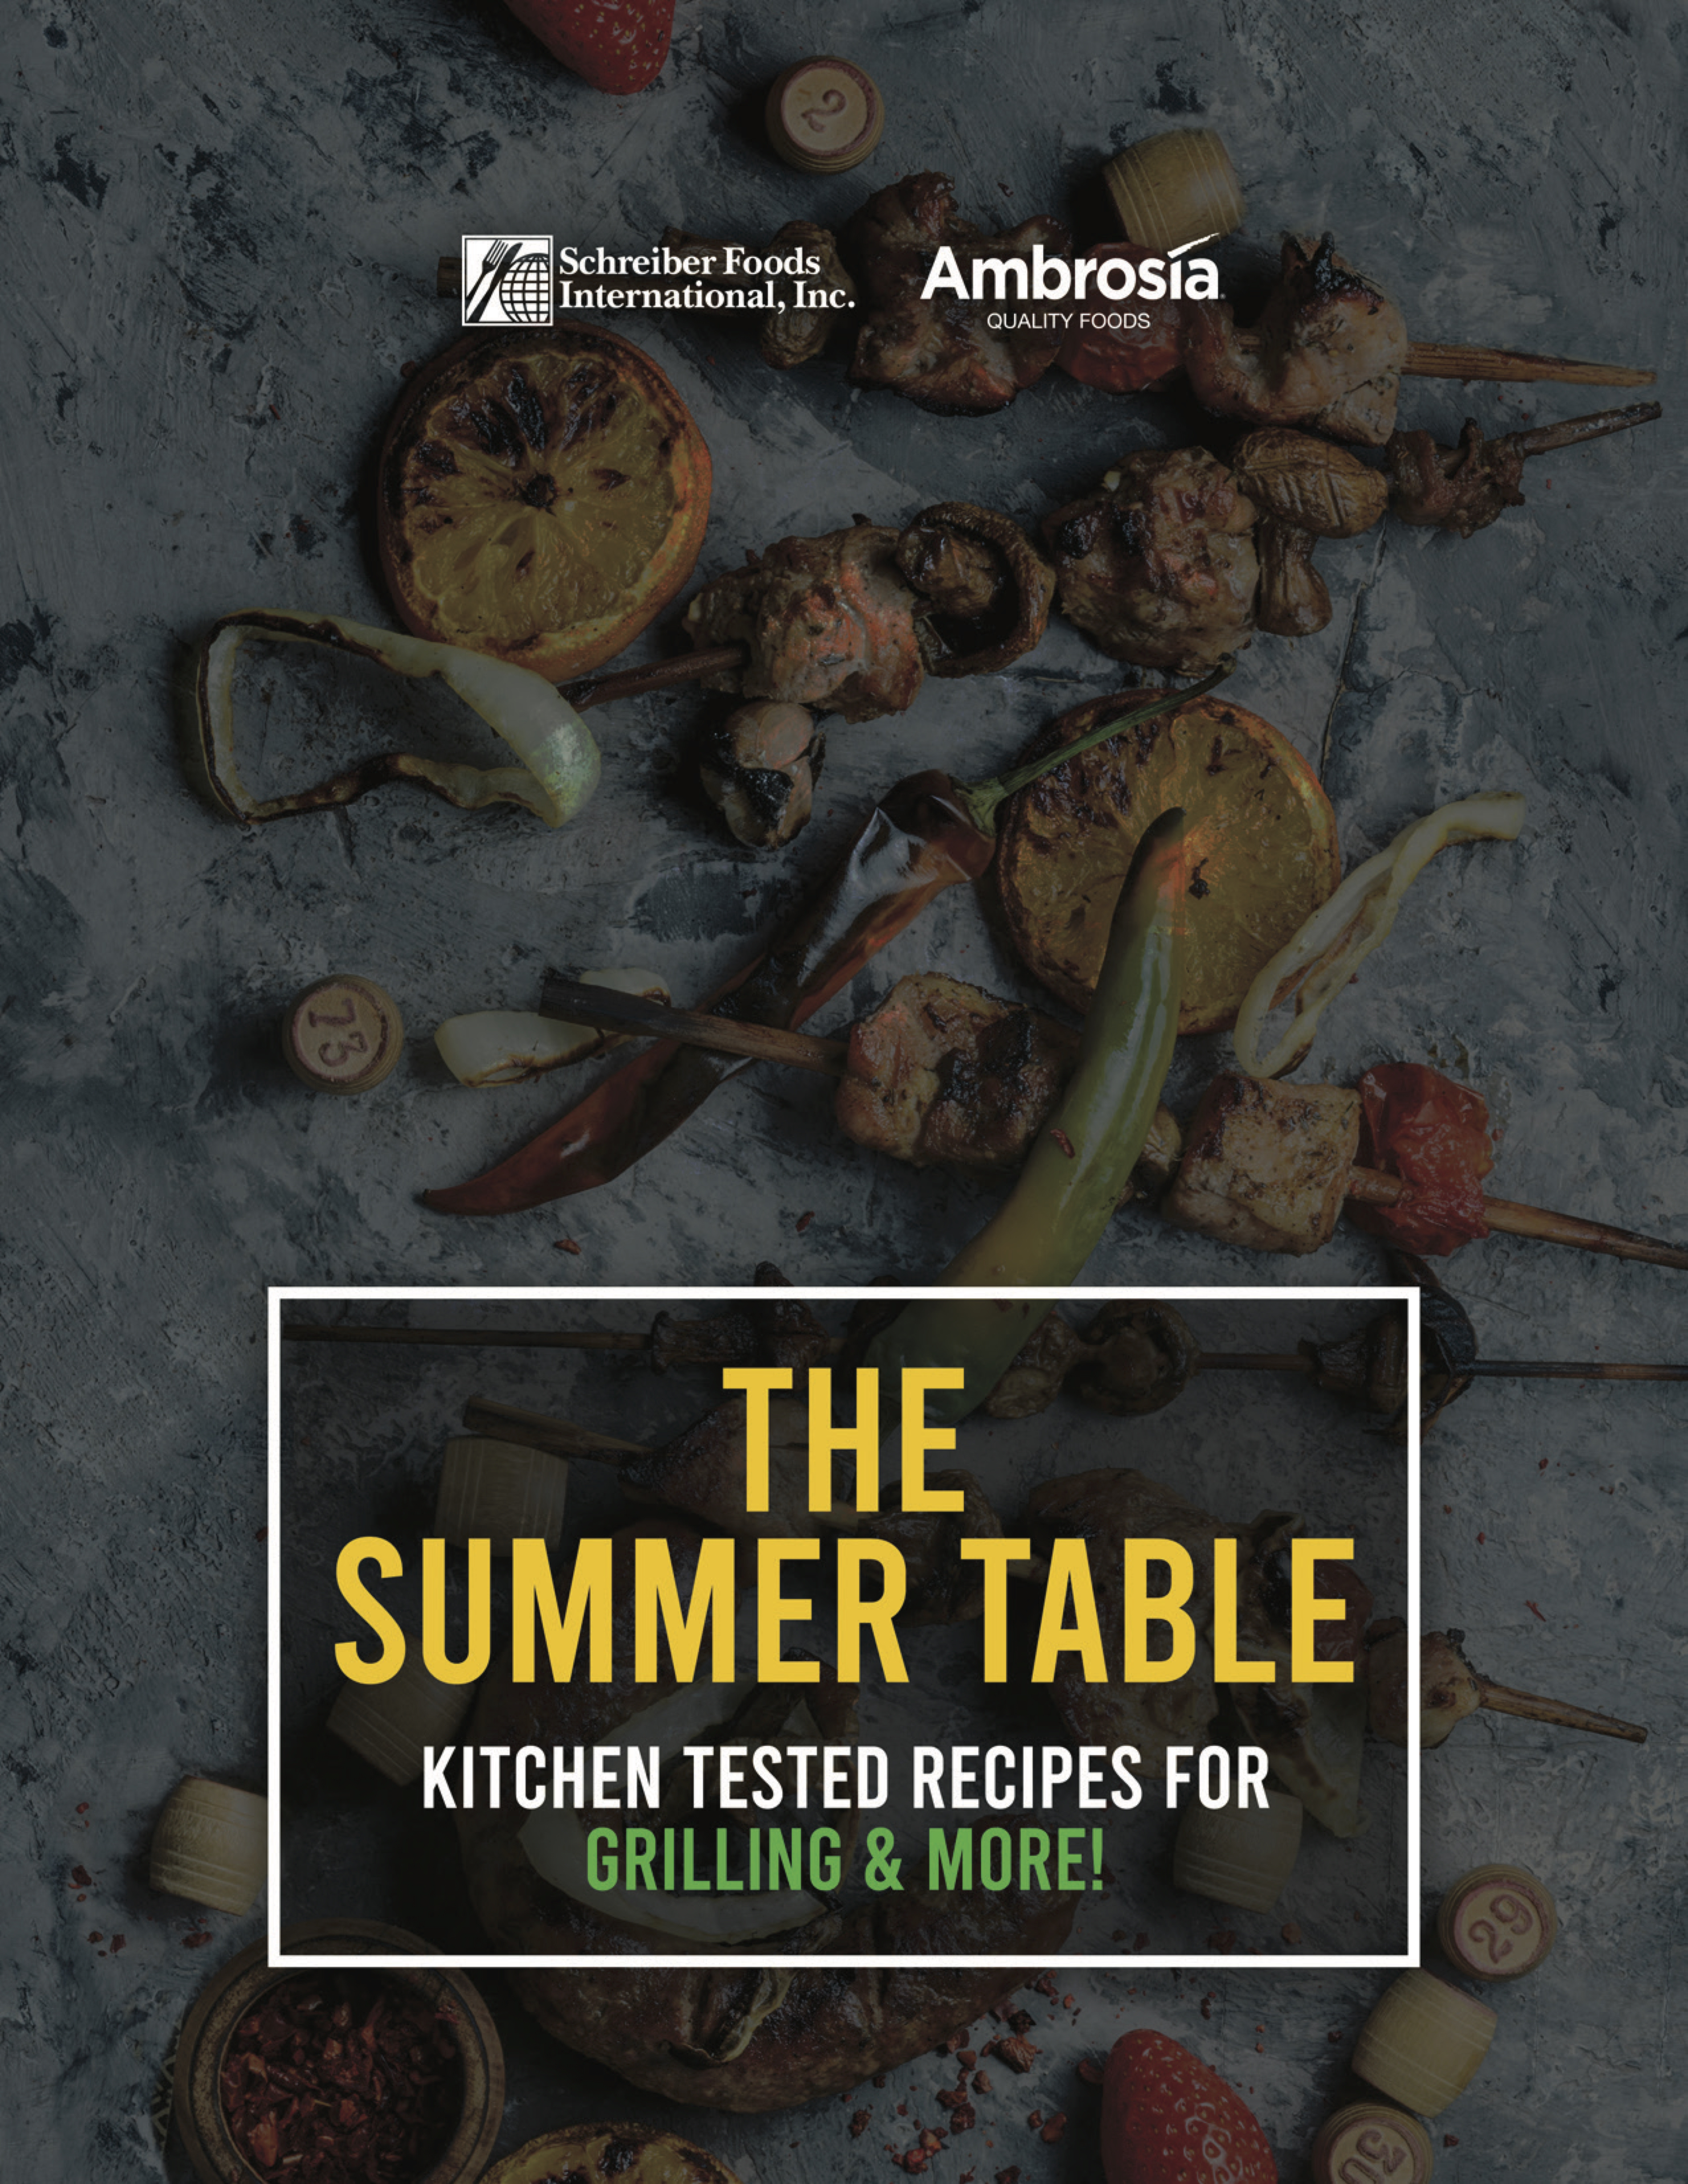 The Summer Table: Kitchen Tested Recipes For Grilling & More!